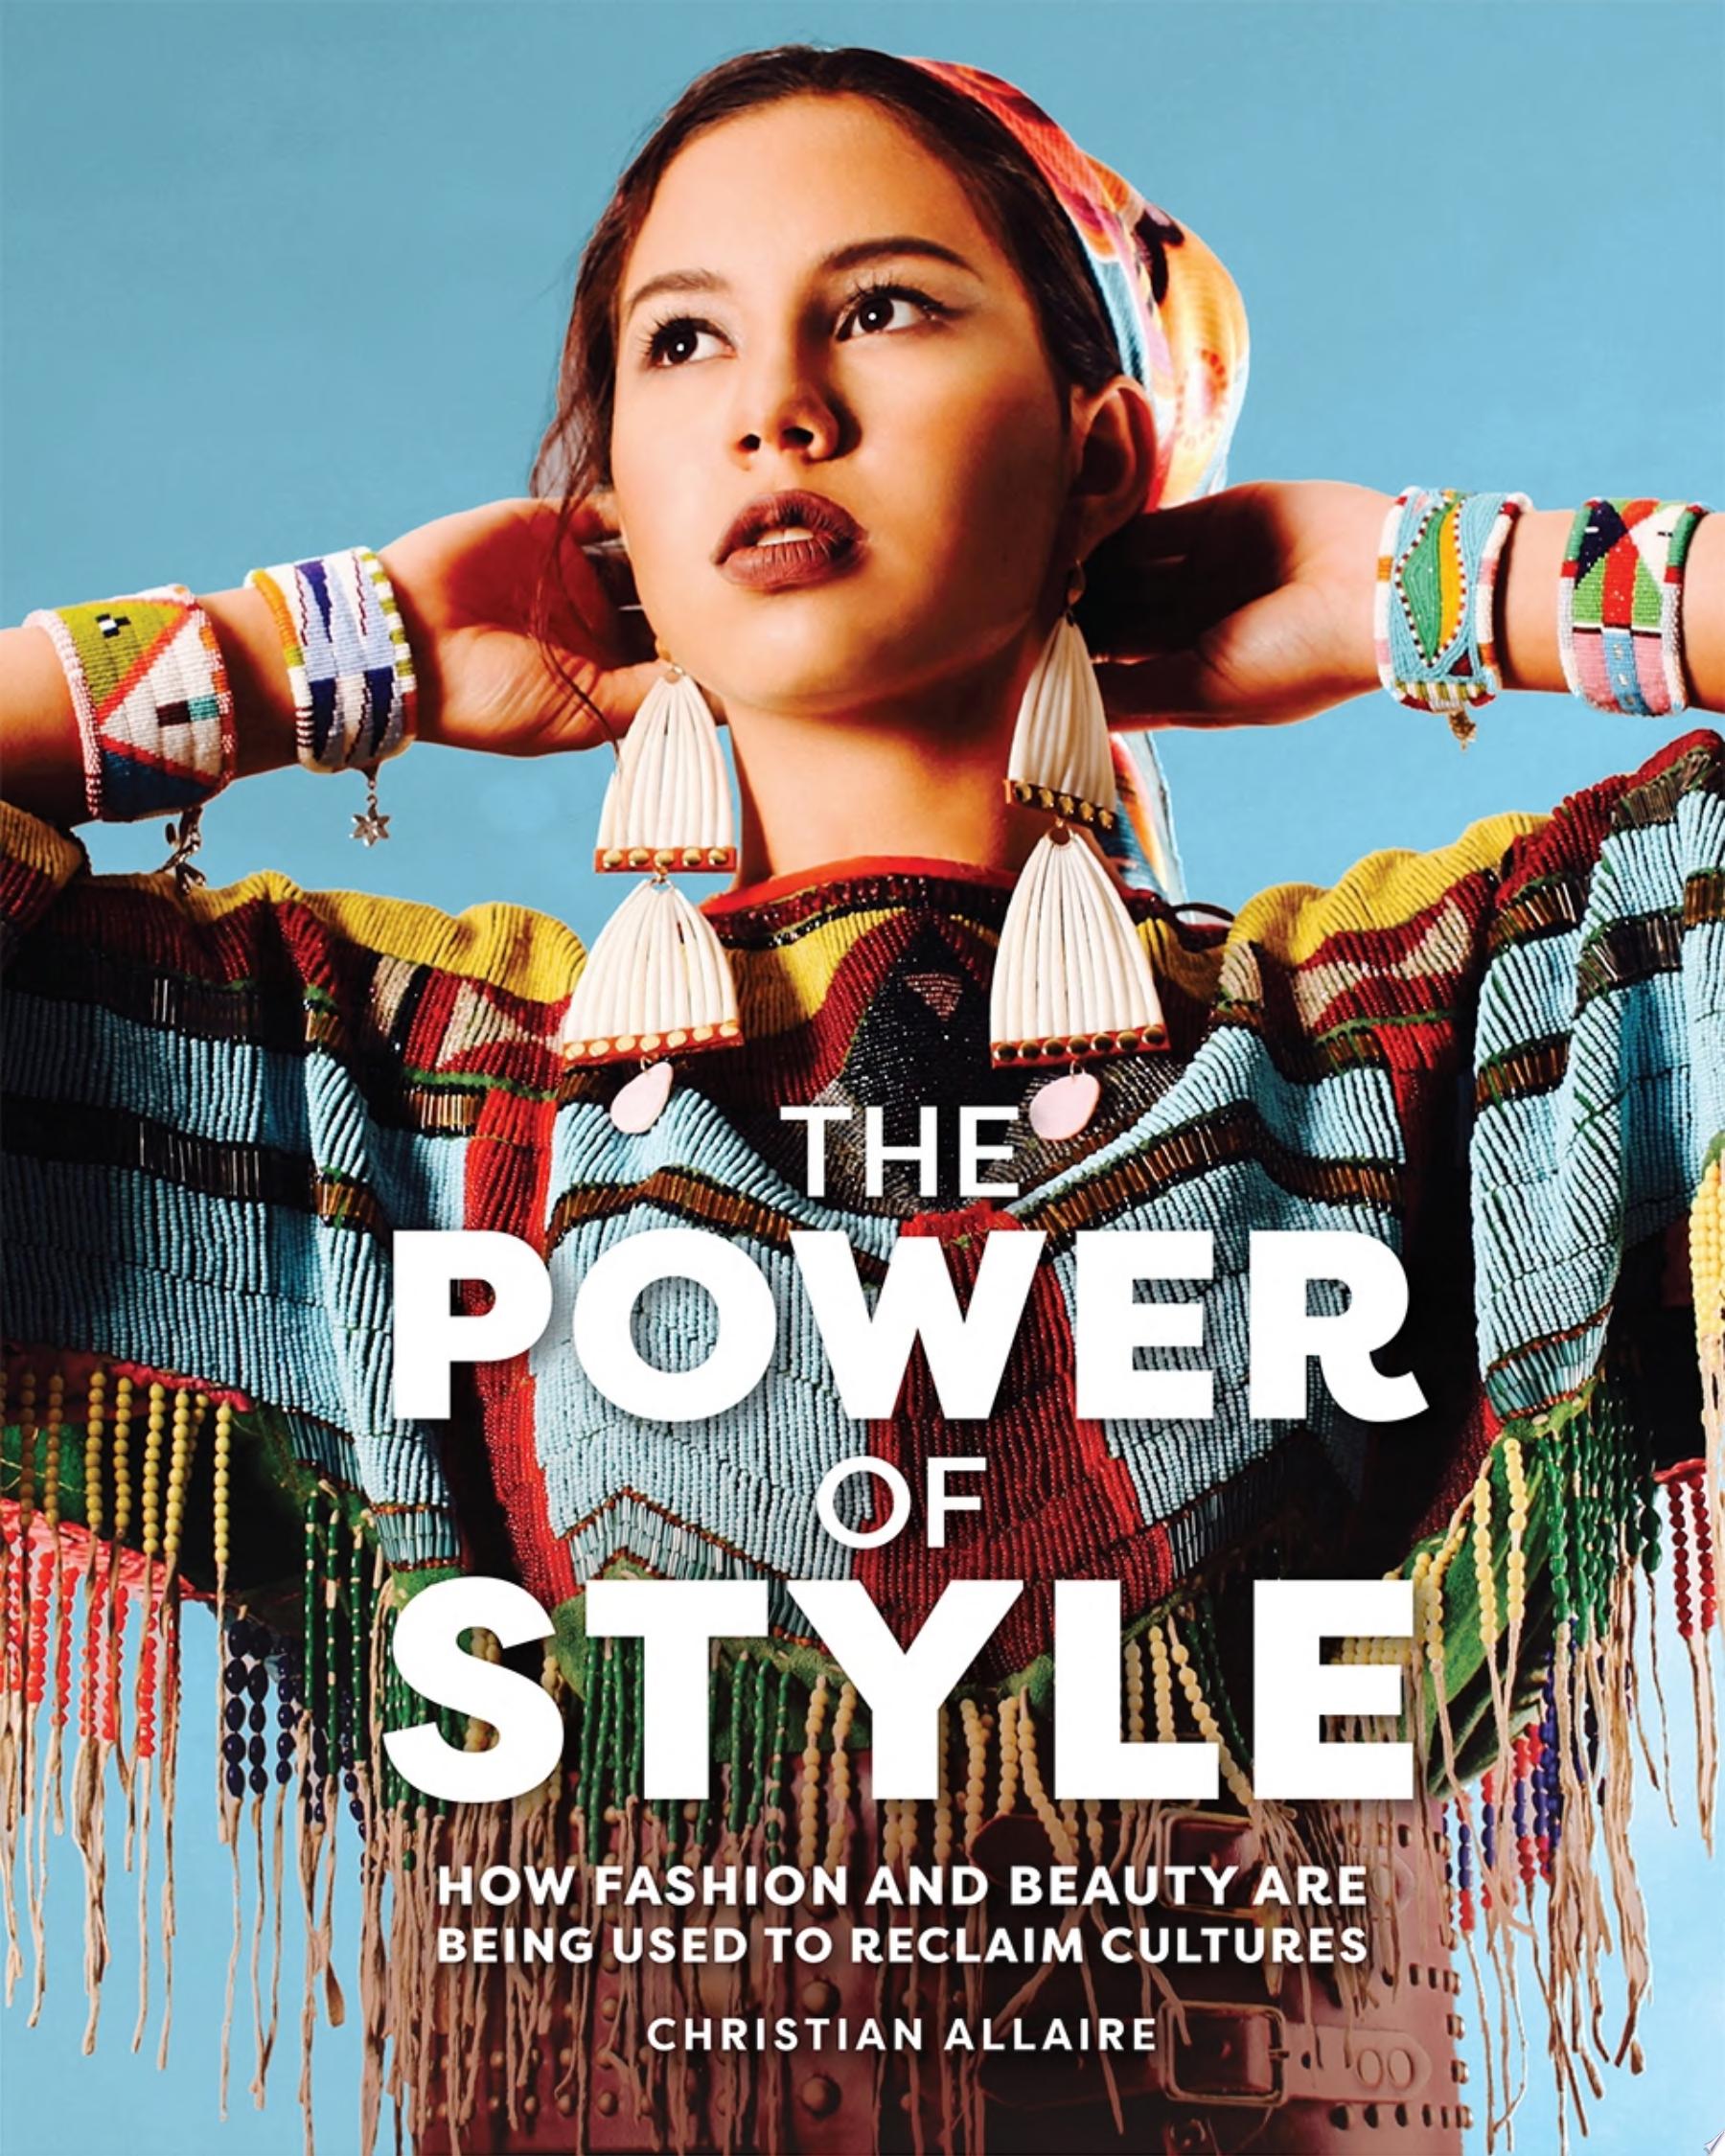 Image for "The Power of Style"